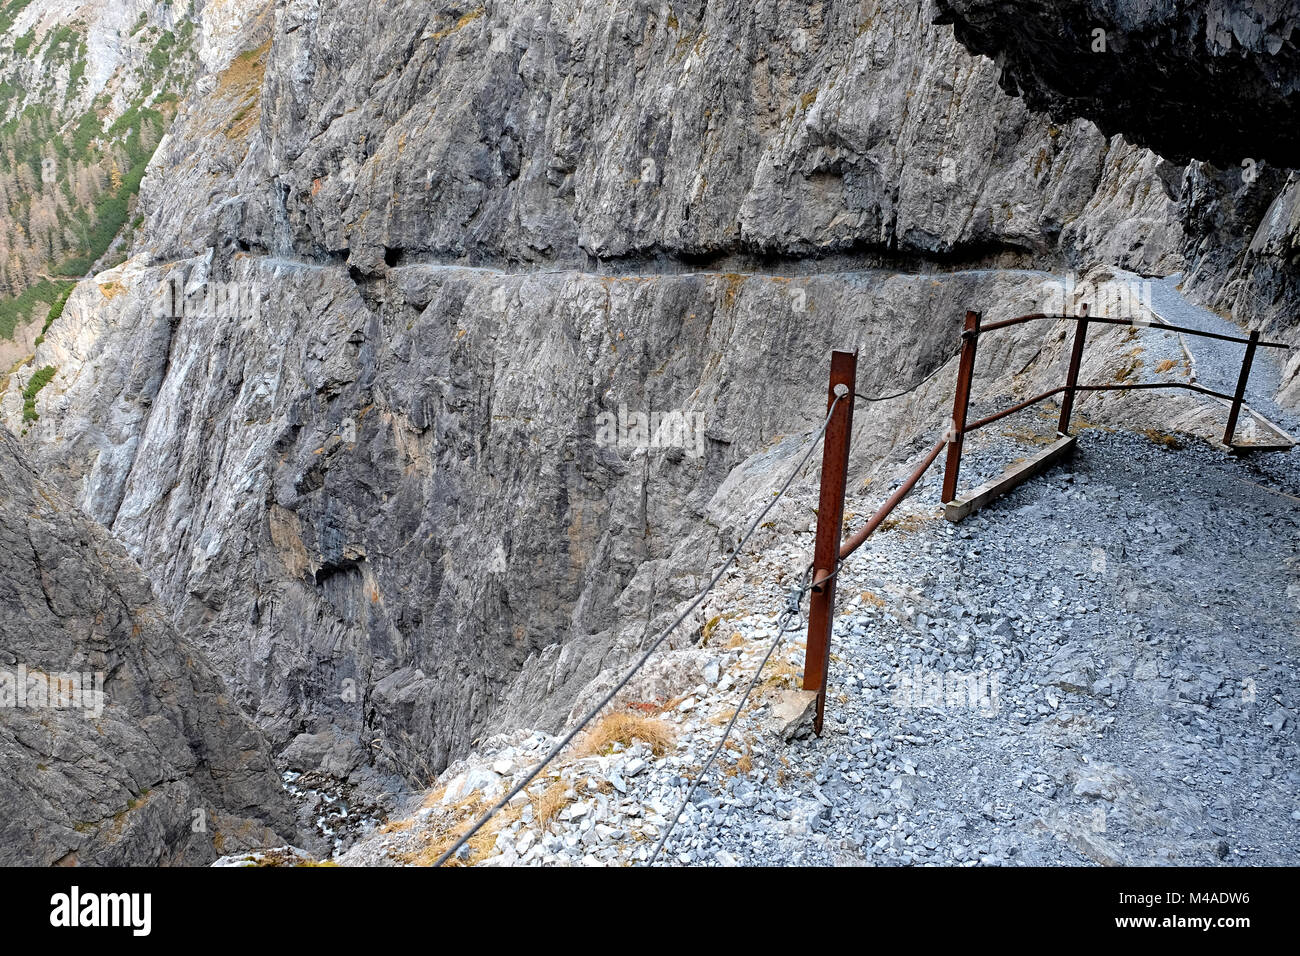 Exposed trail in the Gorge of Uina, South Tyrol, Italy, Switzerland Stock Photo